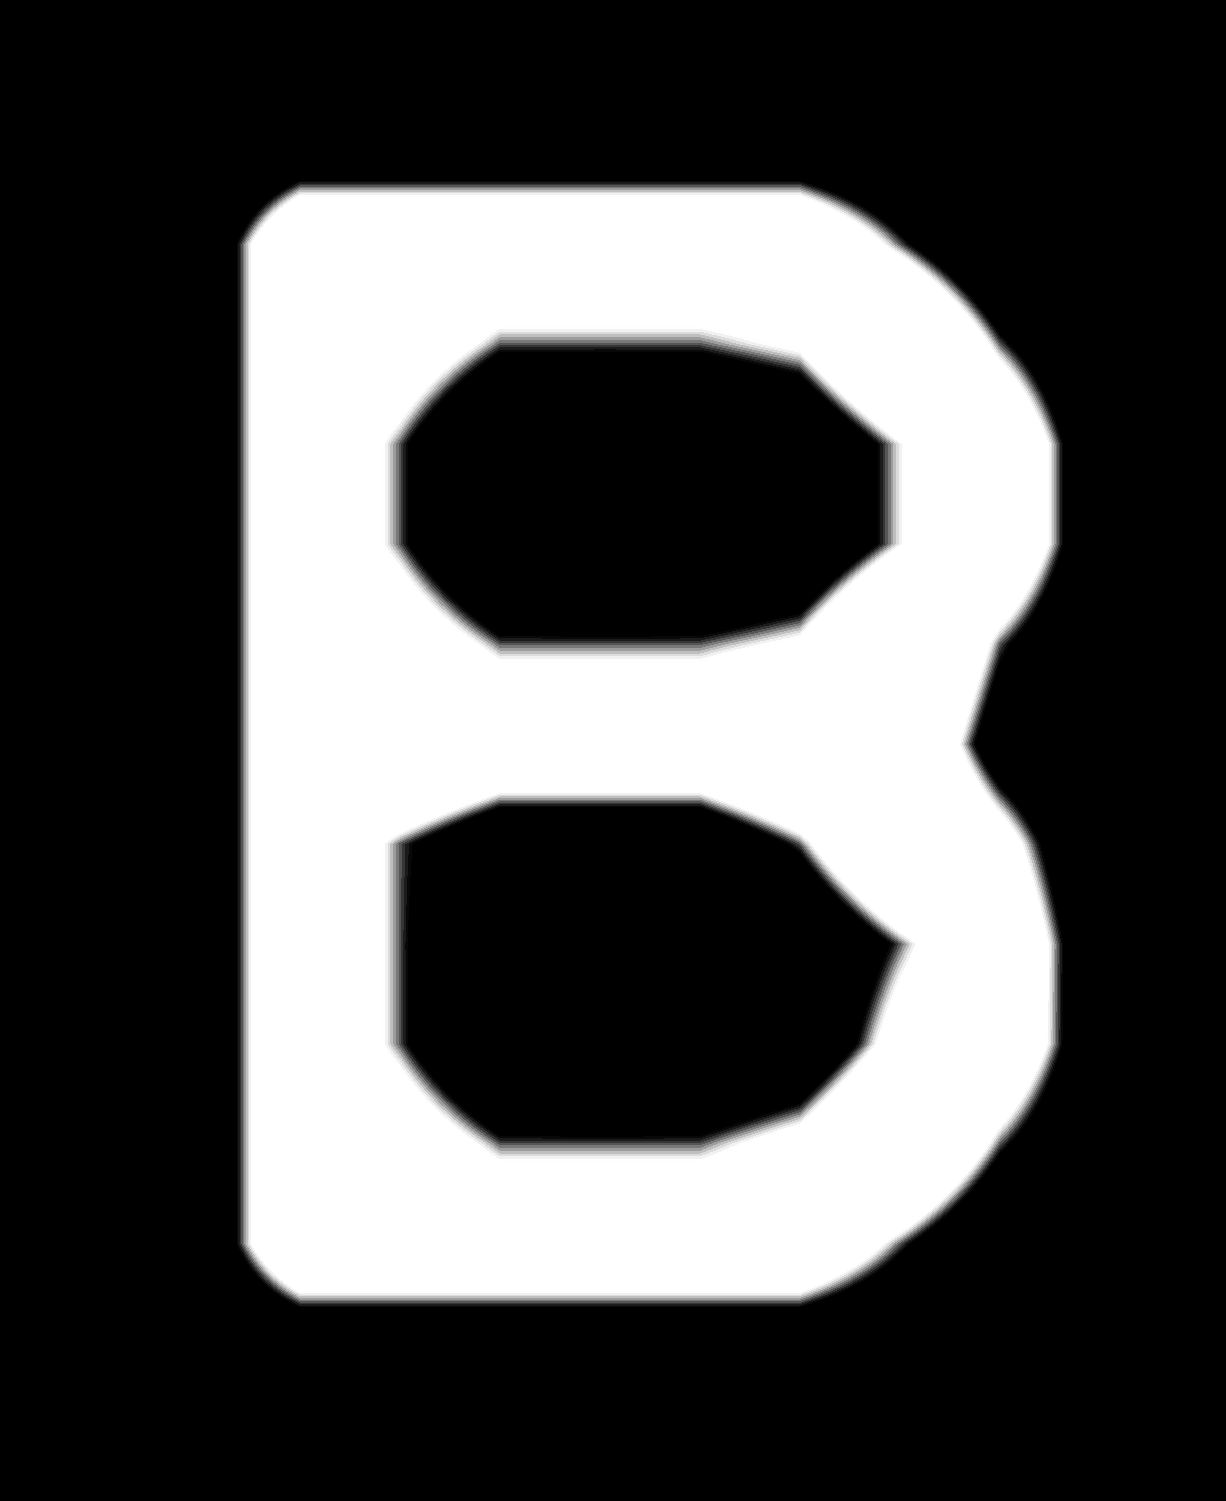 A really big letter B